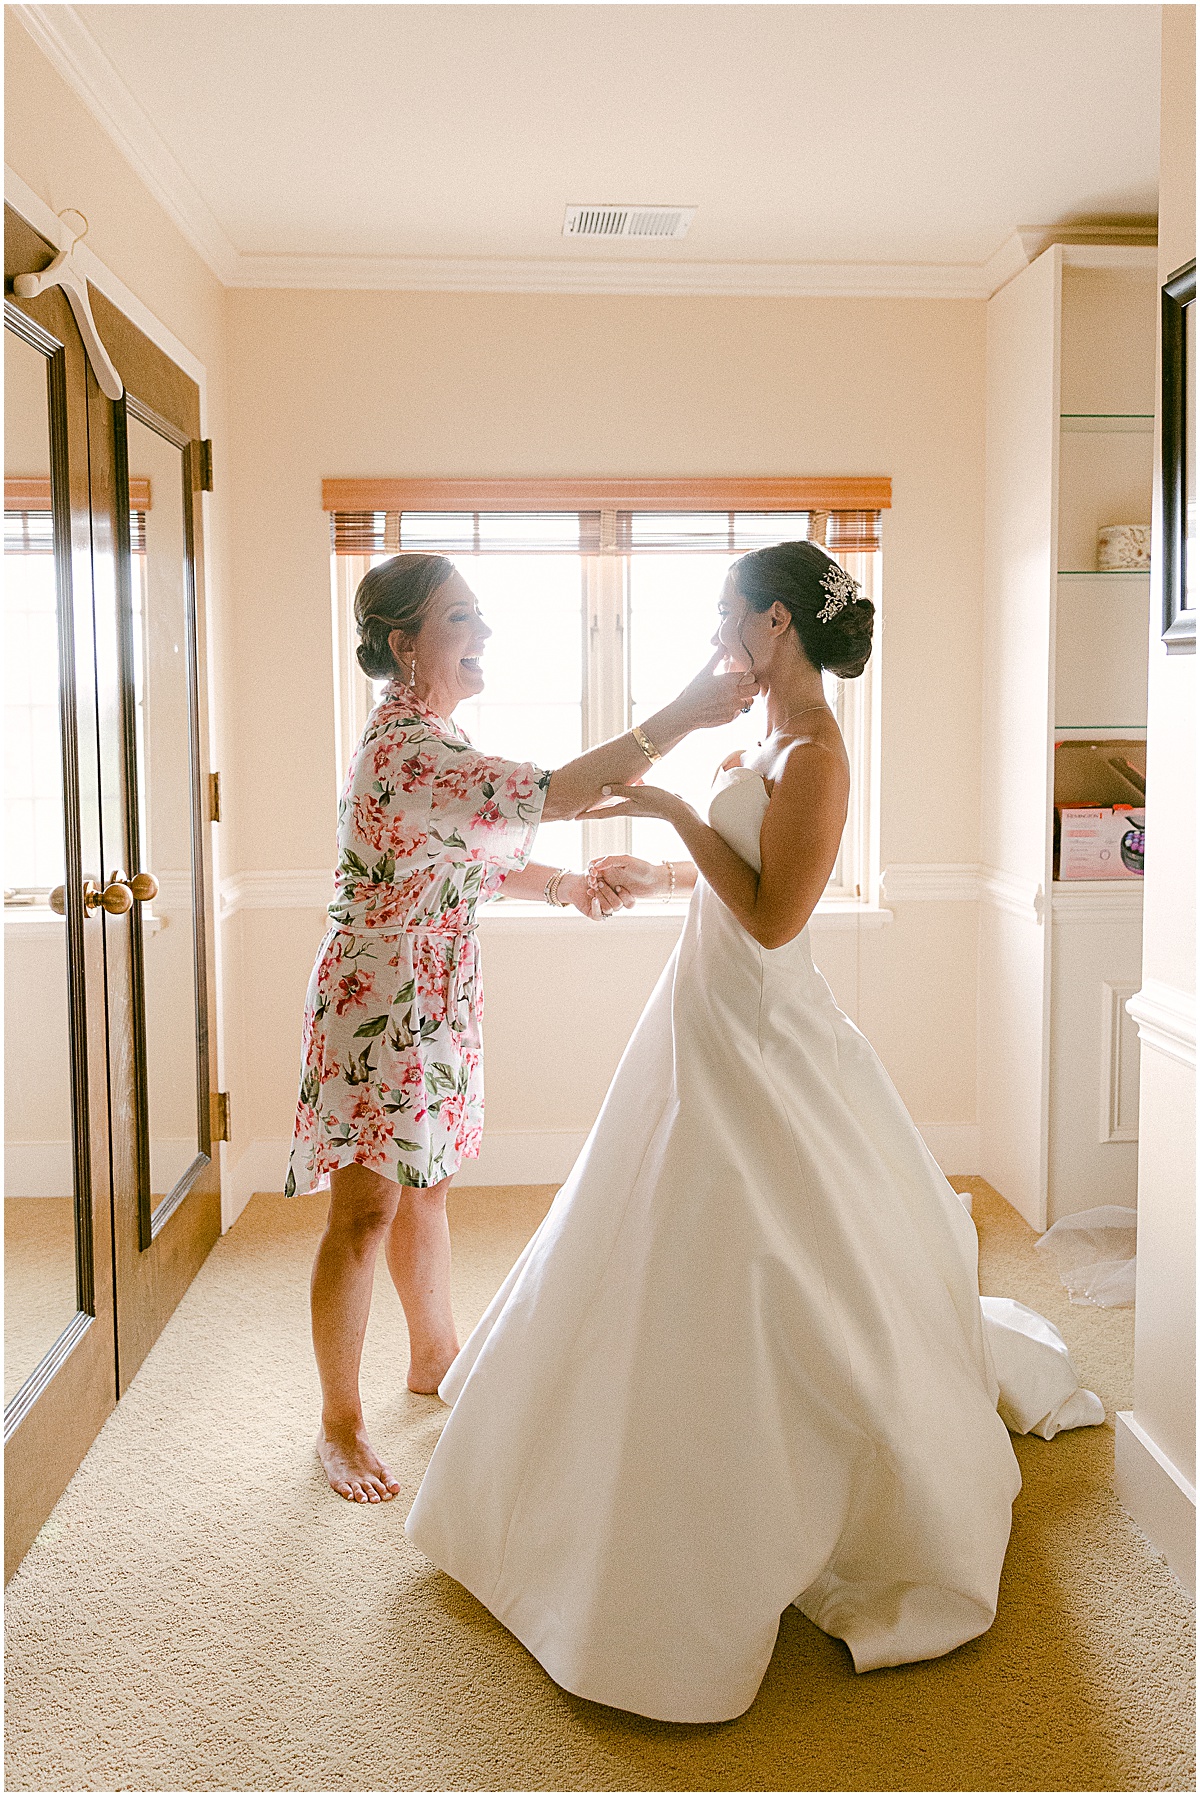 Tender moment during getting ready  at Congressional Country Club wedding by Sarah Bradshaw